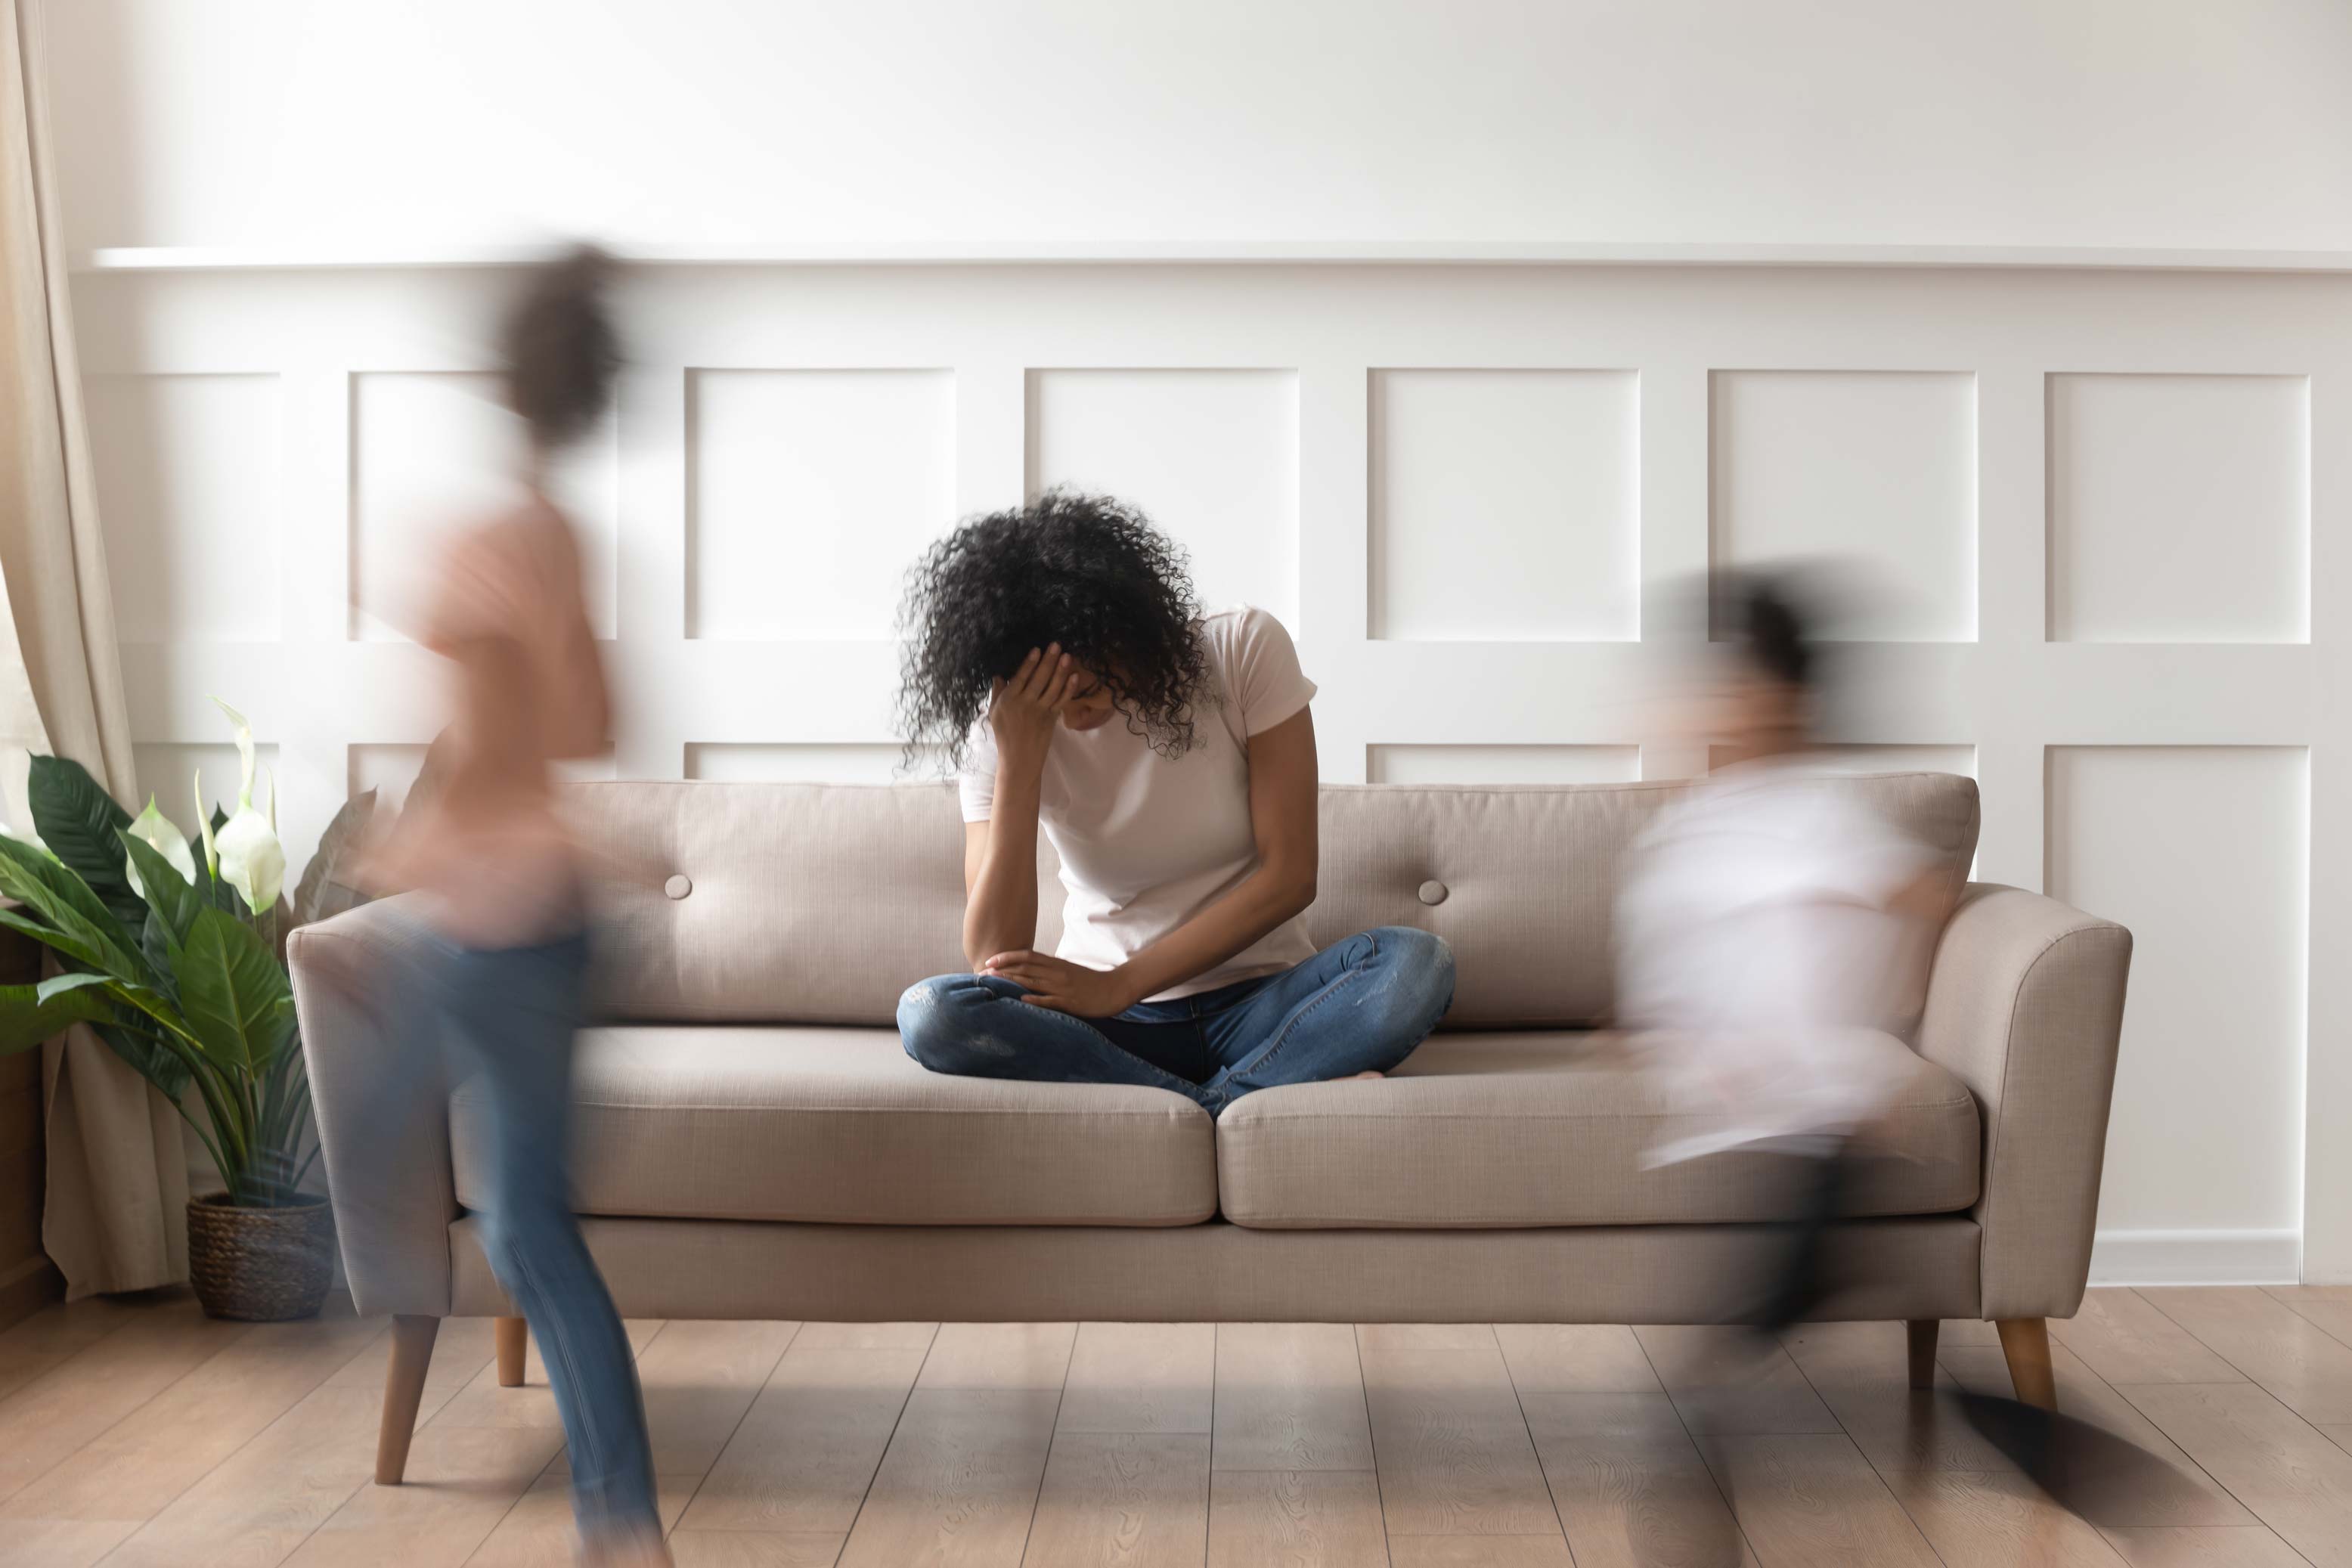 Woman sitting down on a couch with her head in her hand. Children are running around her with a motion blur effect.